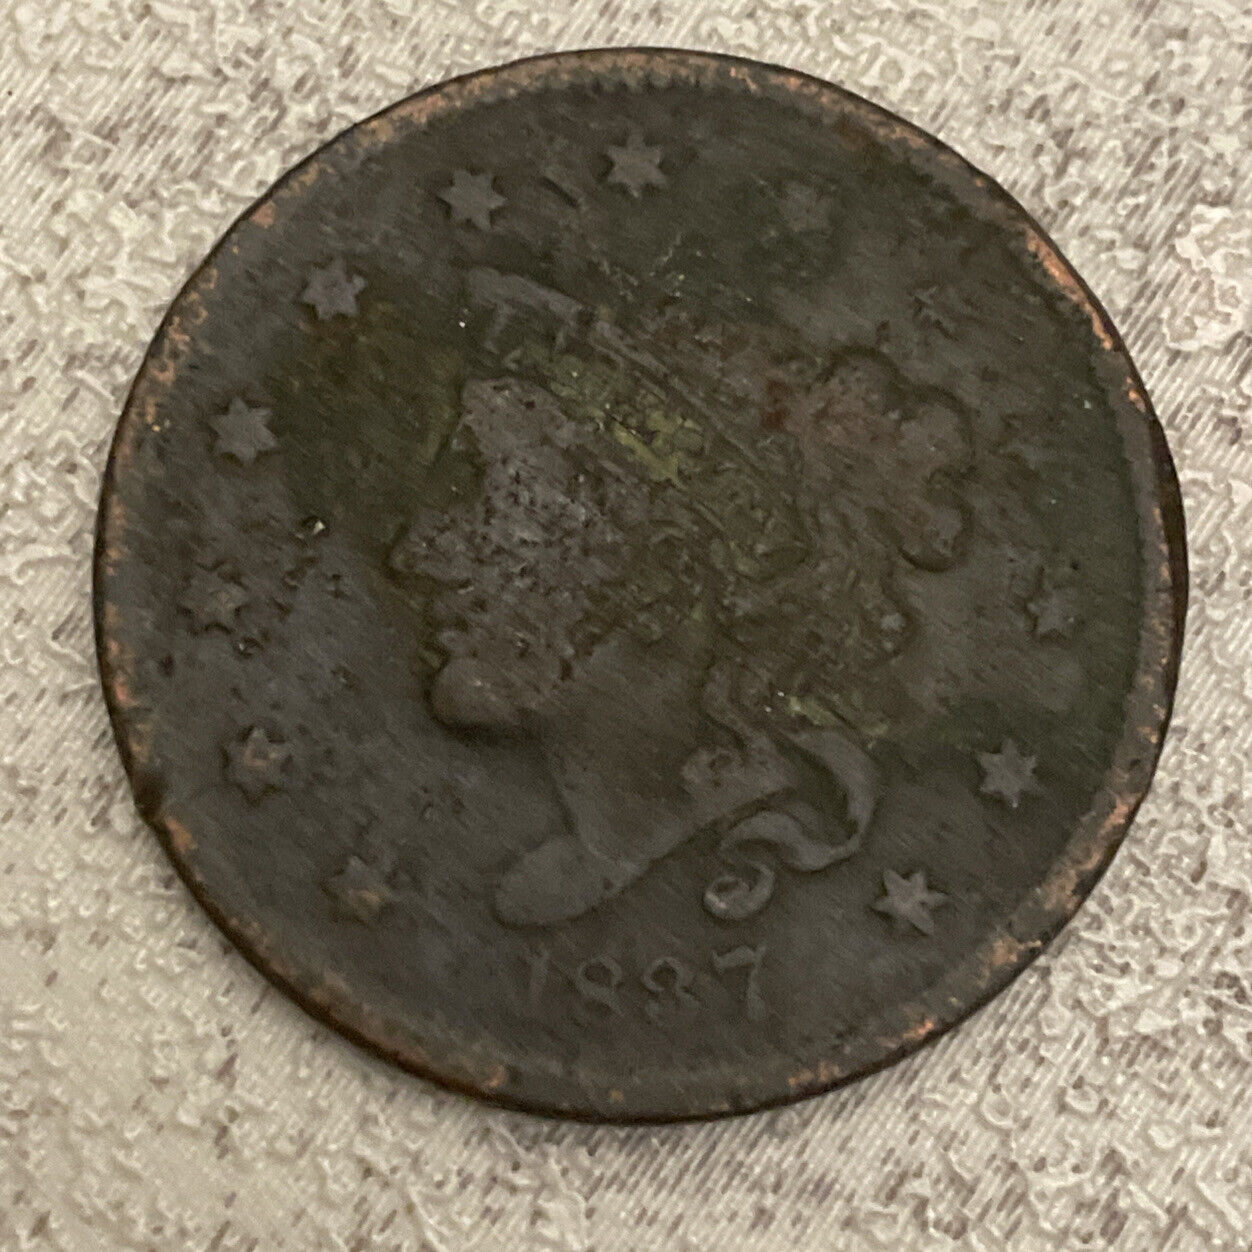 1837 Coronet Head large cent fine details dark toned Copper and Old Goodie!